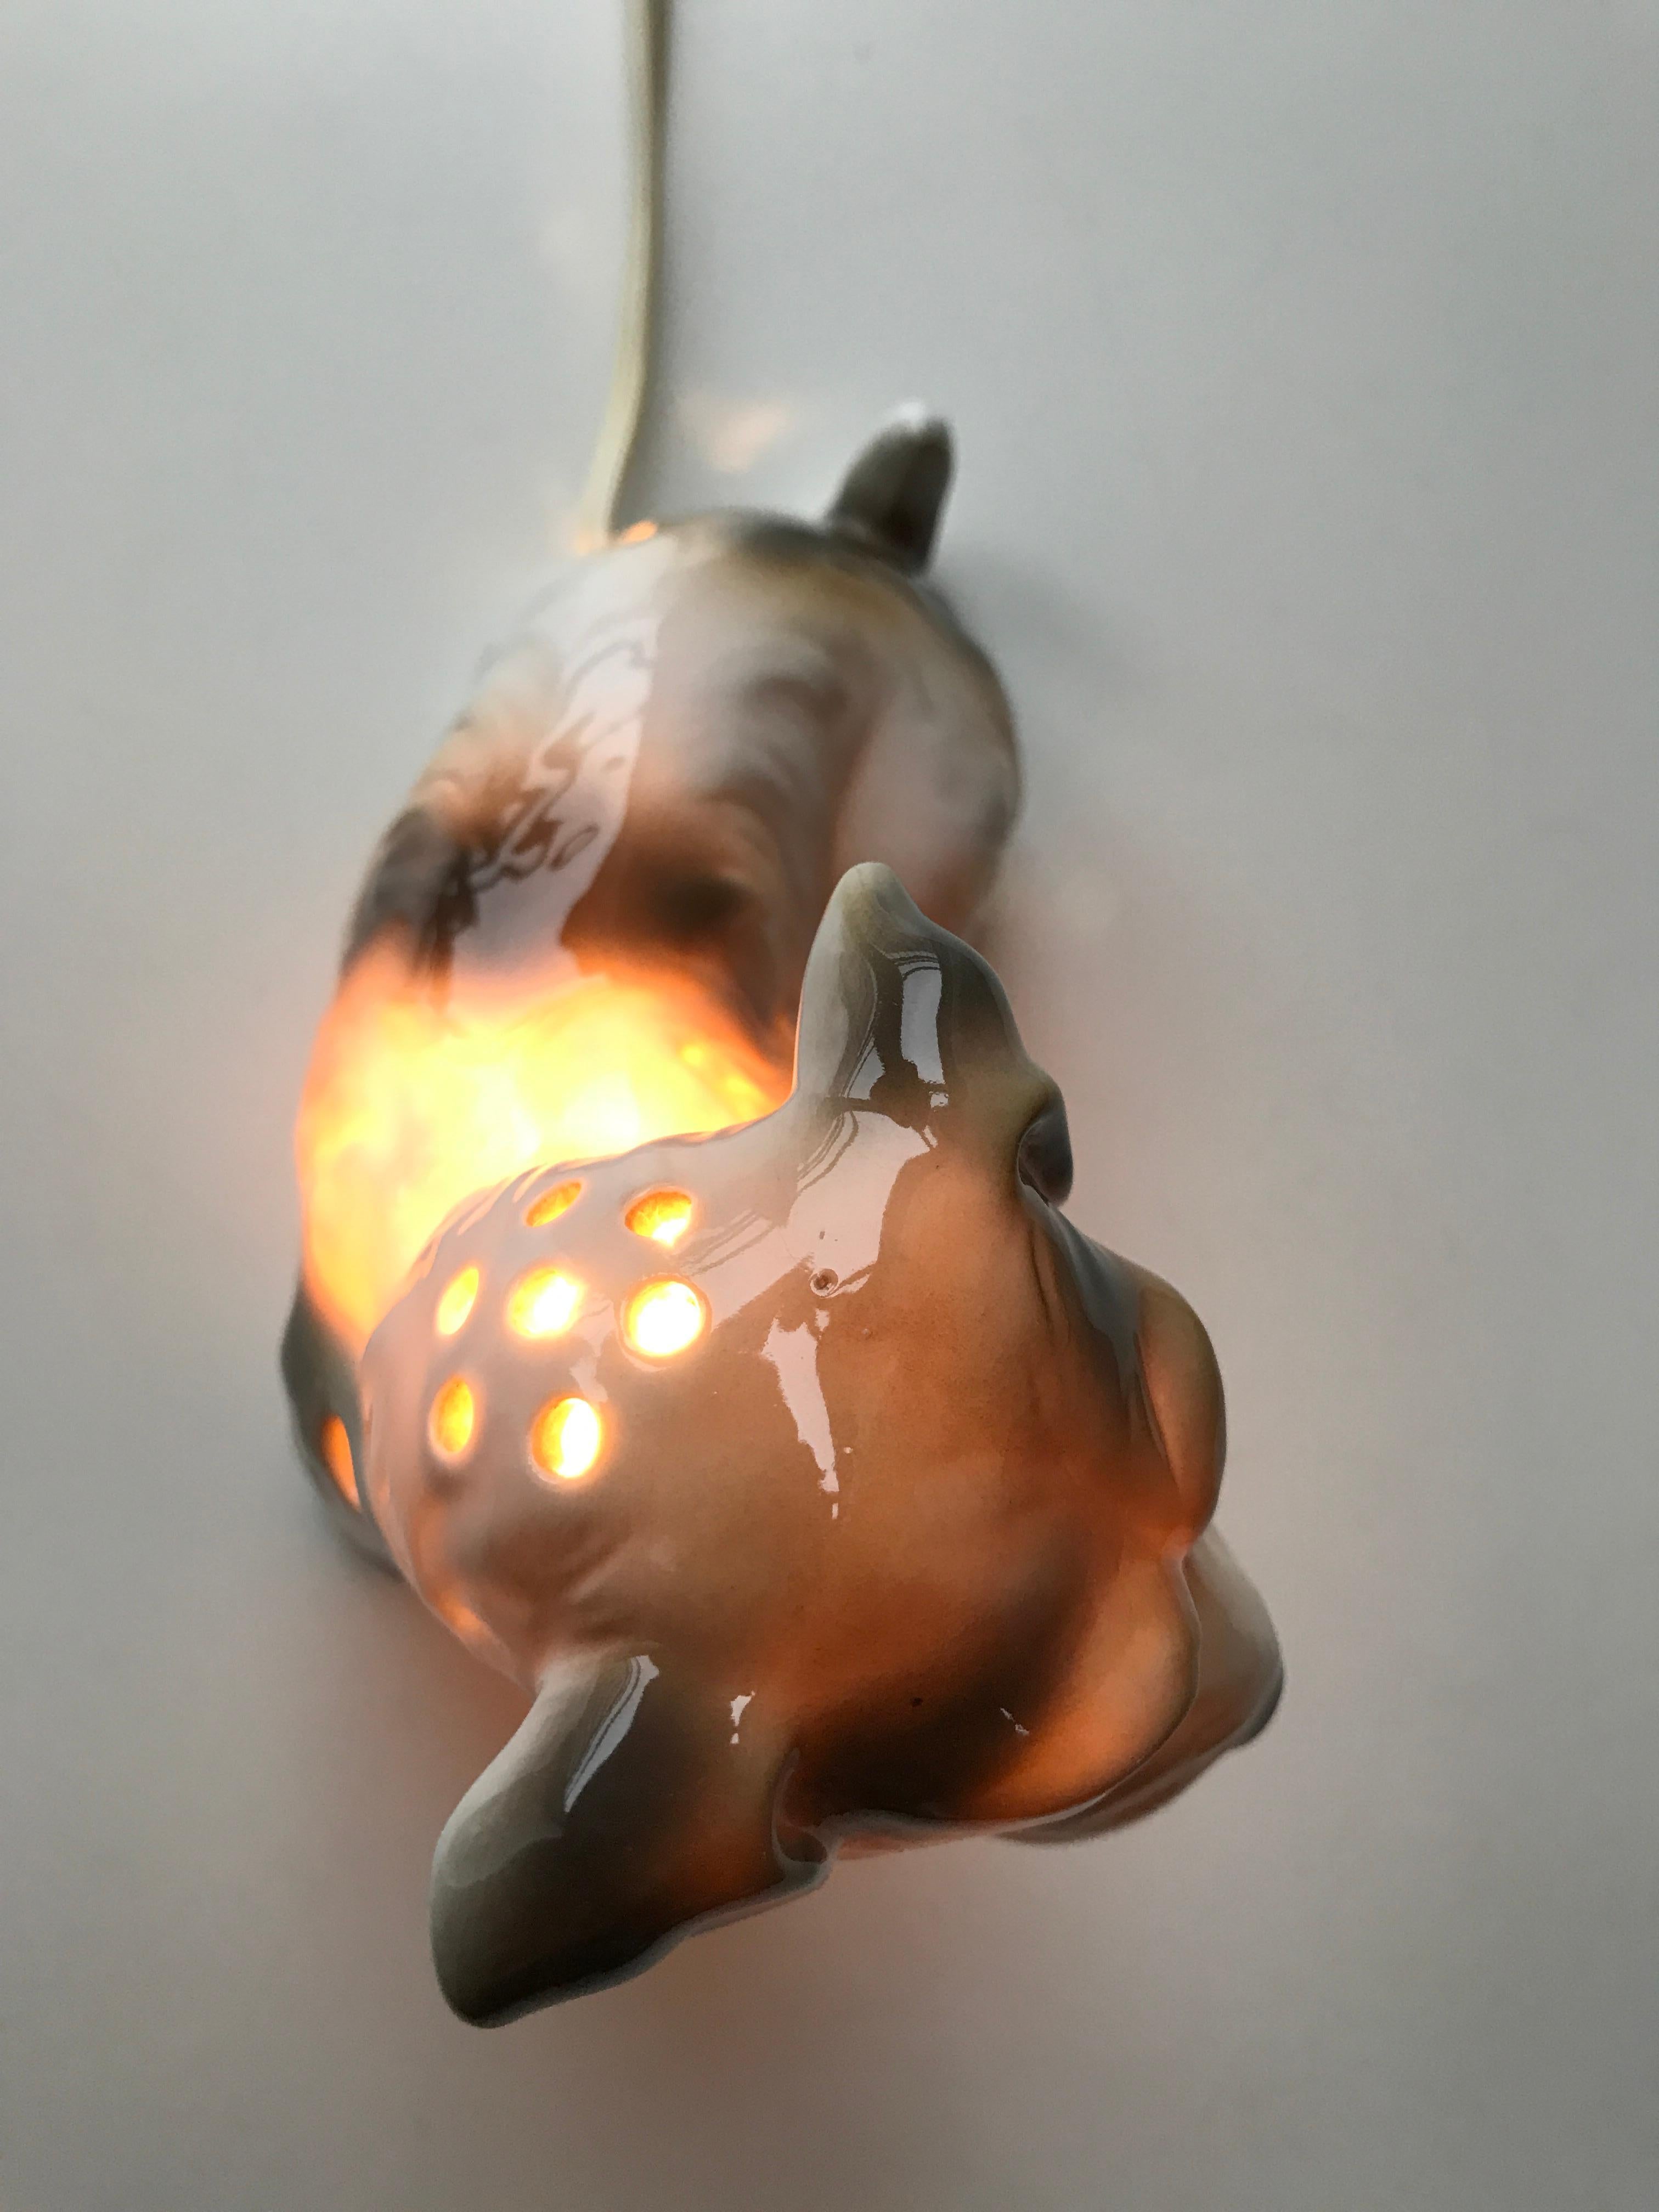 Dog Figurine Ozon/Perfume Lamp Early 20th Century Table Lamp by Fog and Mørup For Sale 5